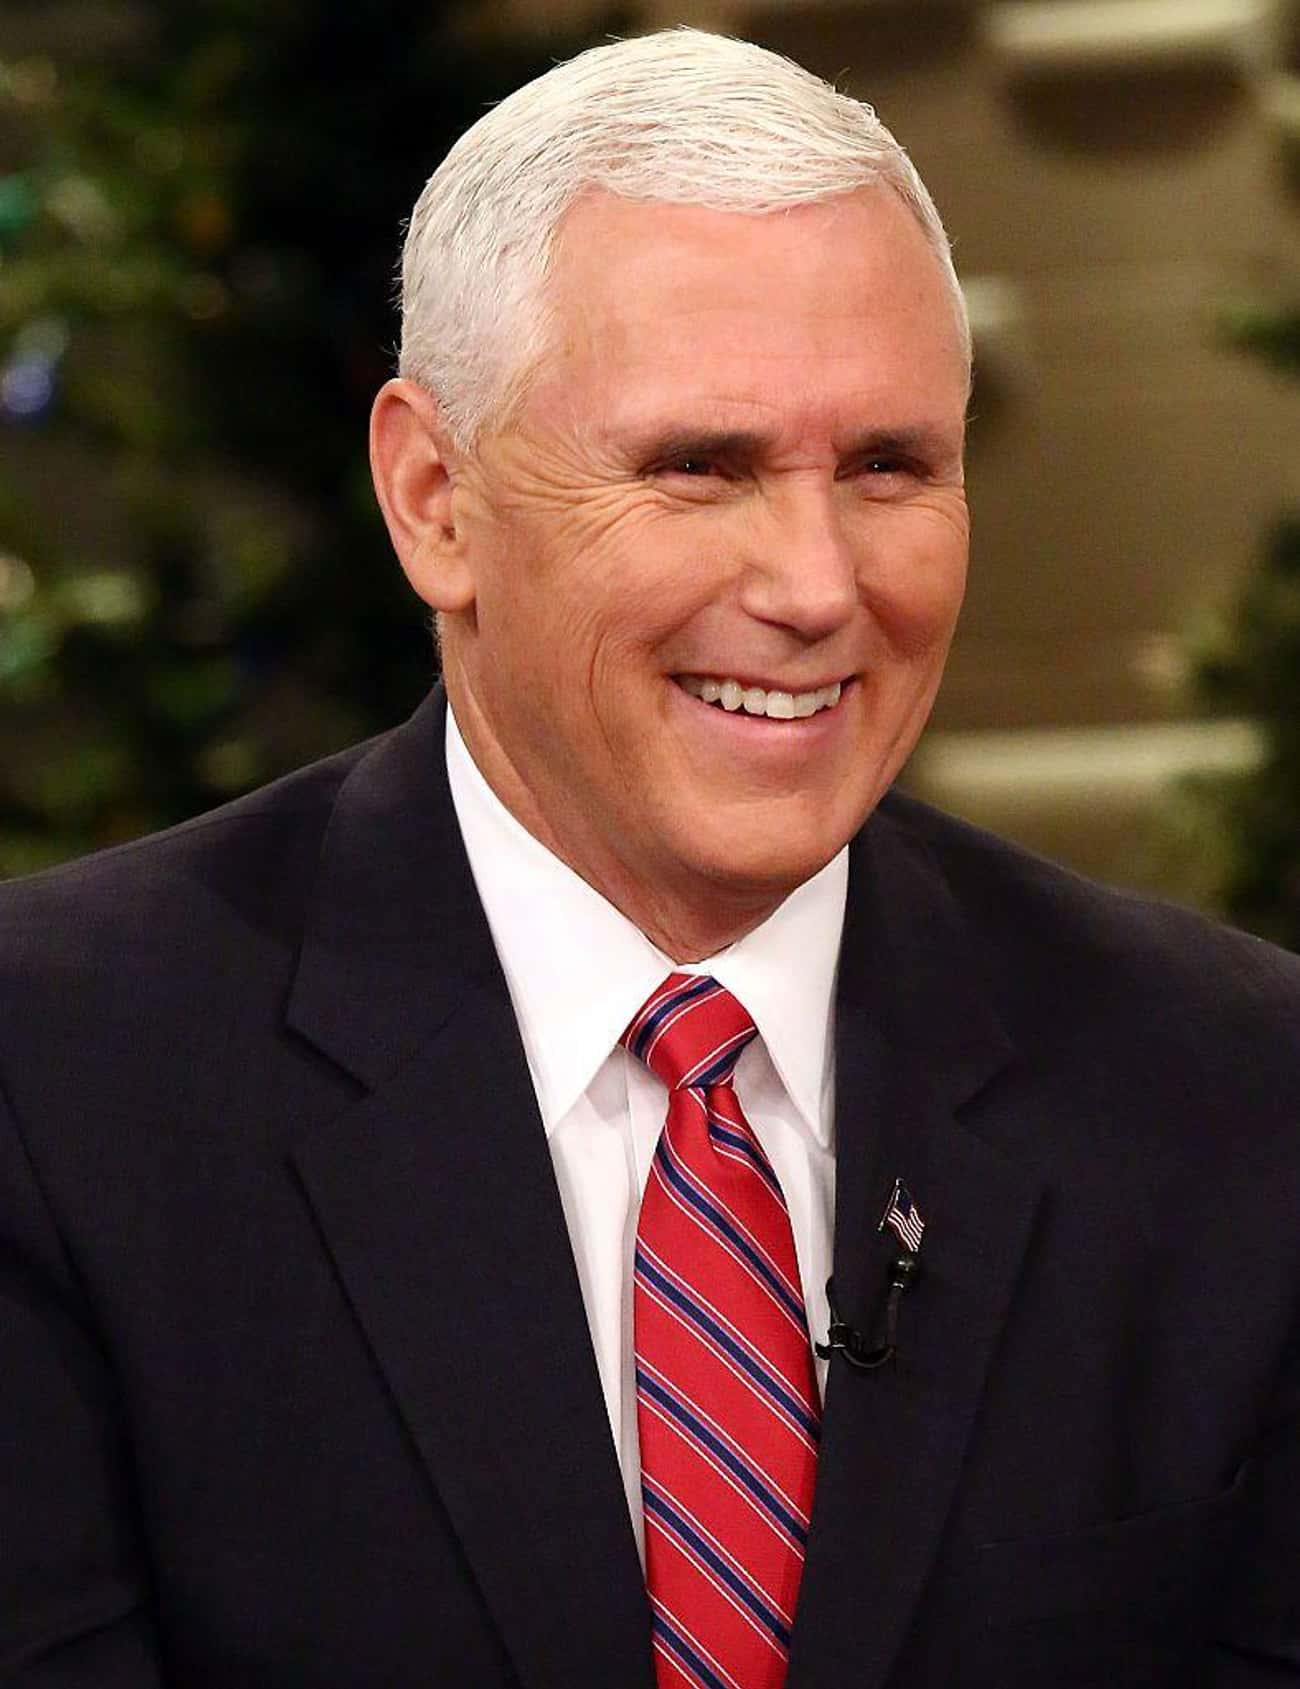 Mike Pence: Vice President